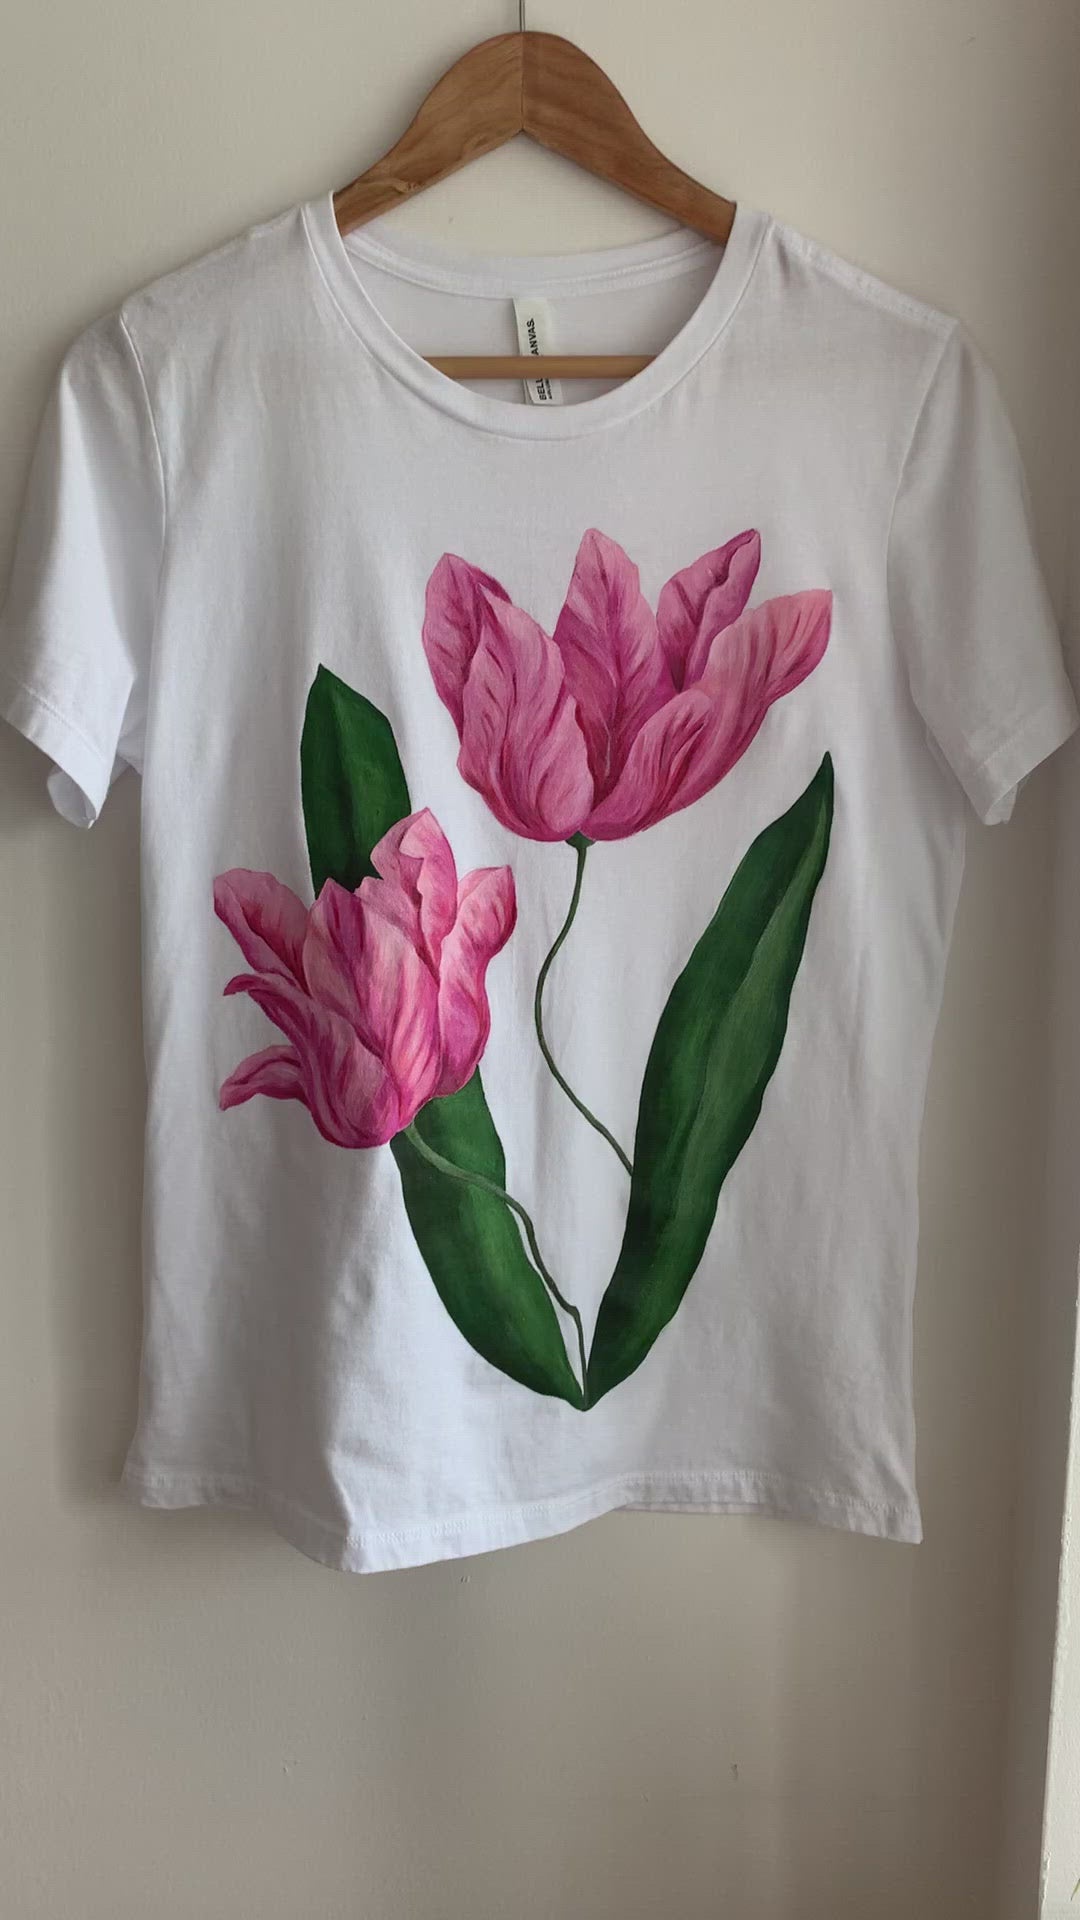 Lot Tulip Fabric Paint Make Your Own Vintage Tshirt Name Lettering